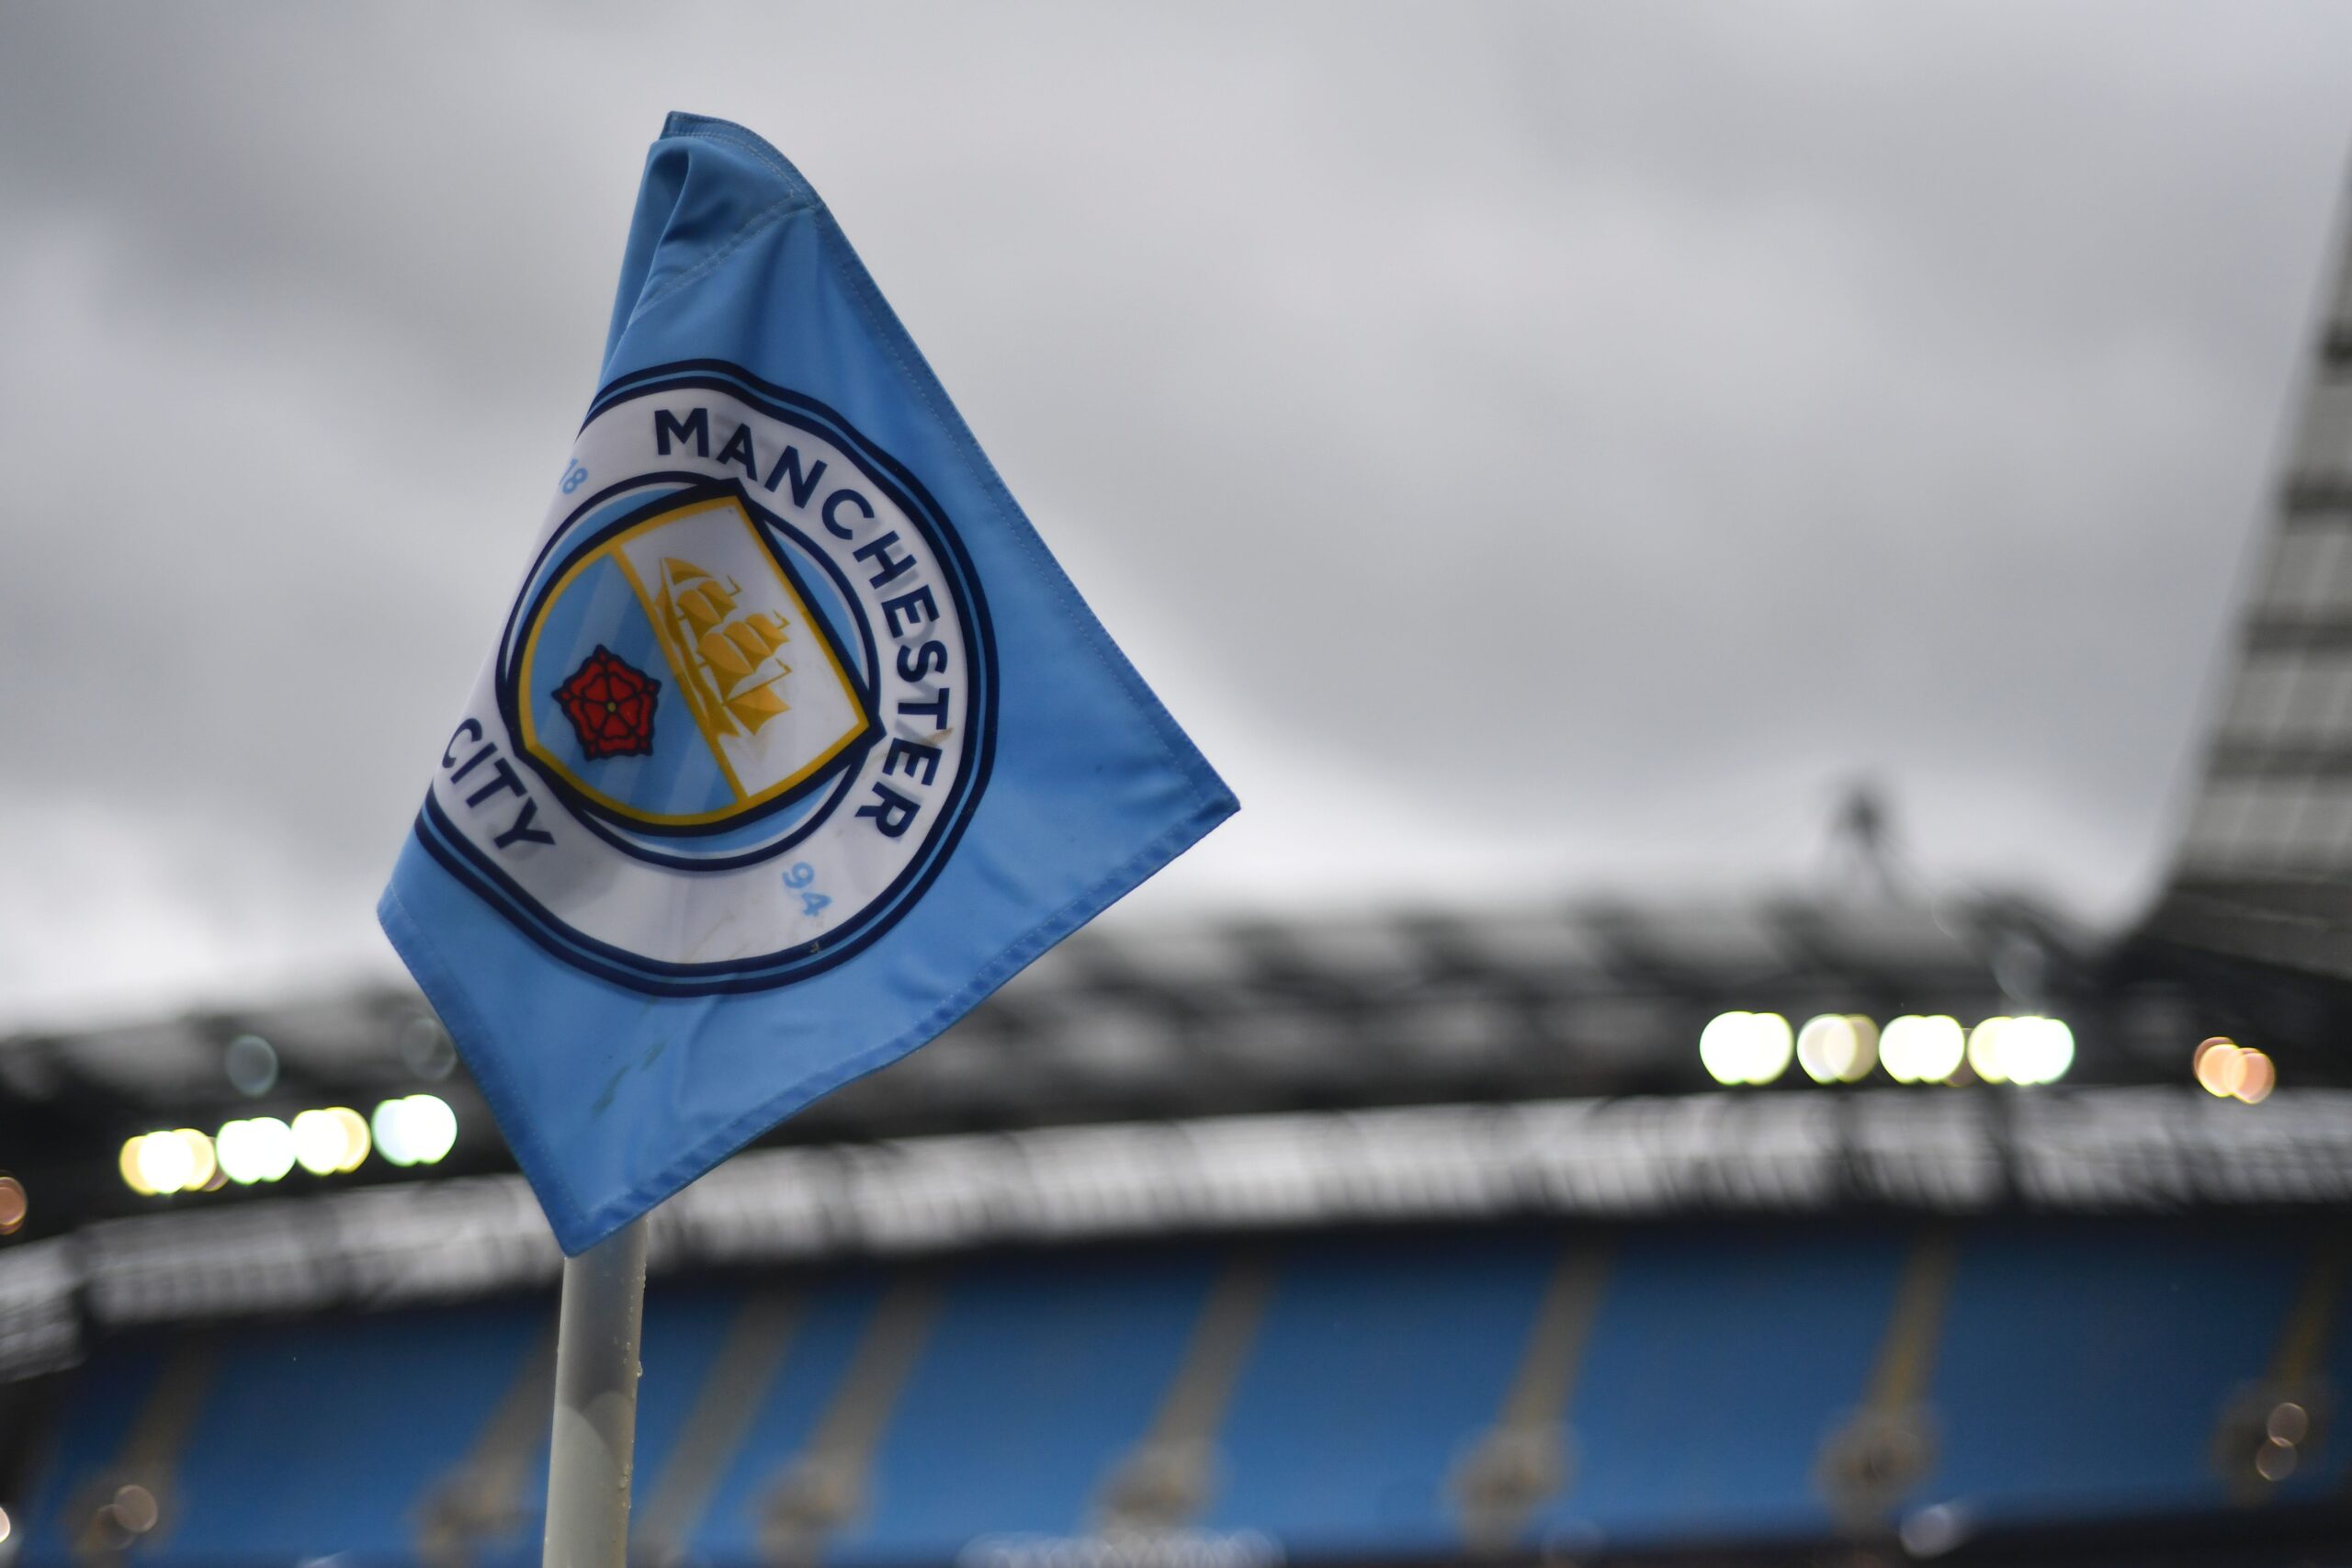 A corner flag is seen ahead of the English Premier League football match between Man City and West Bromwich Albion at the Etihad Stadium in Manchester, north west England, on May 16, 2017.